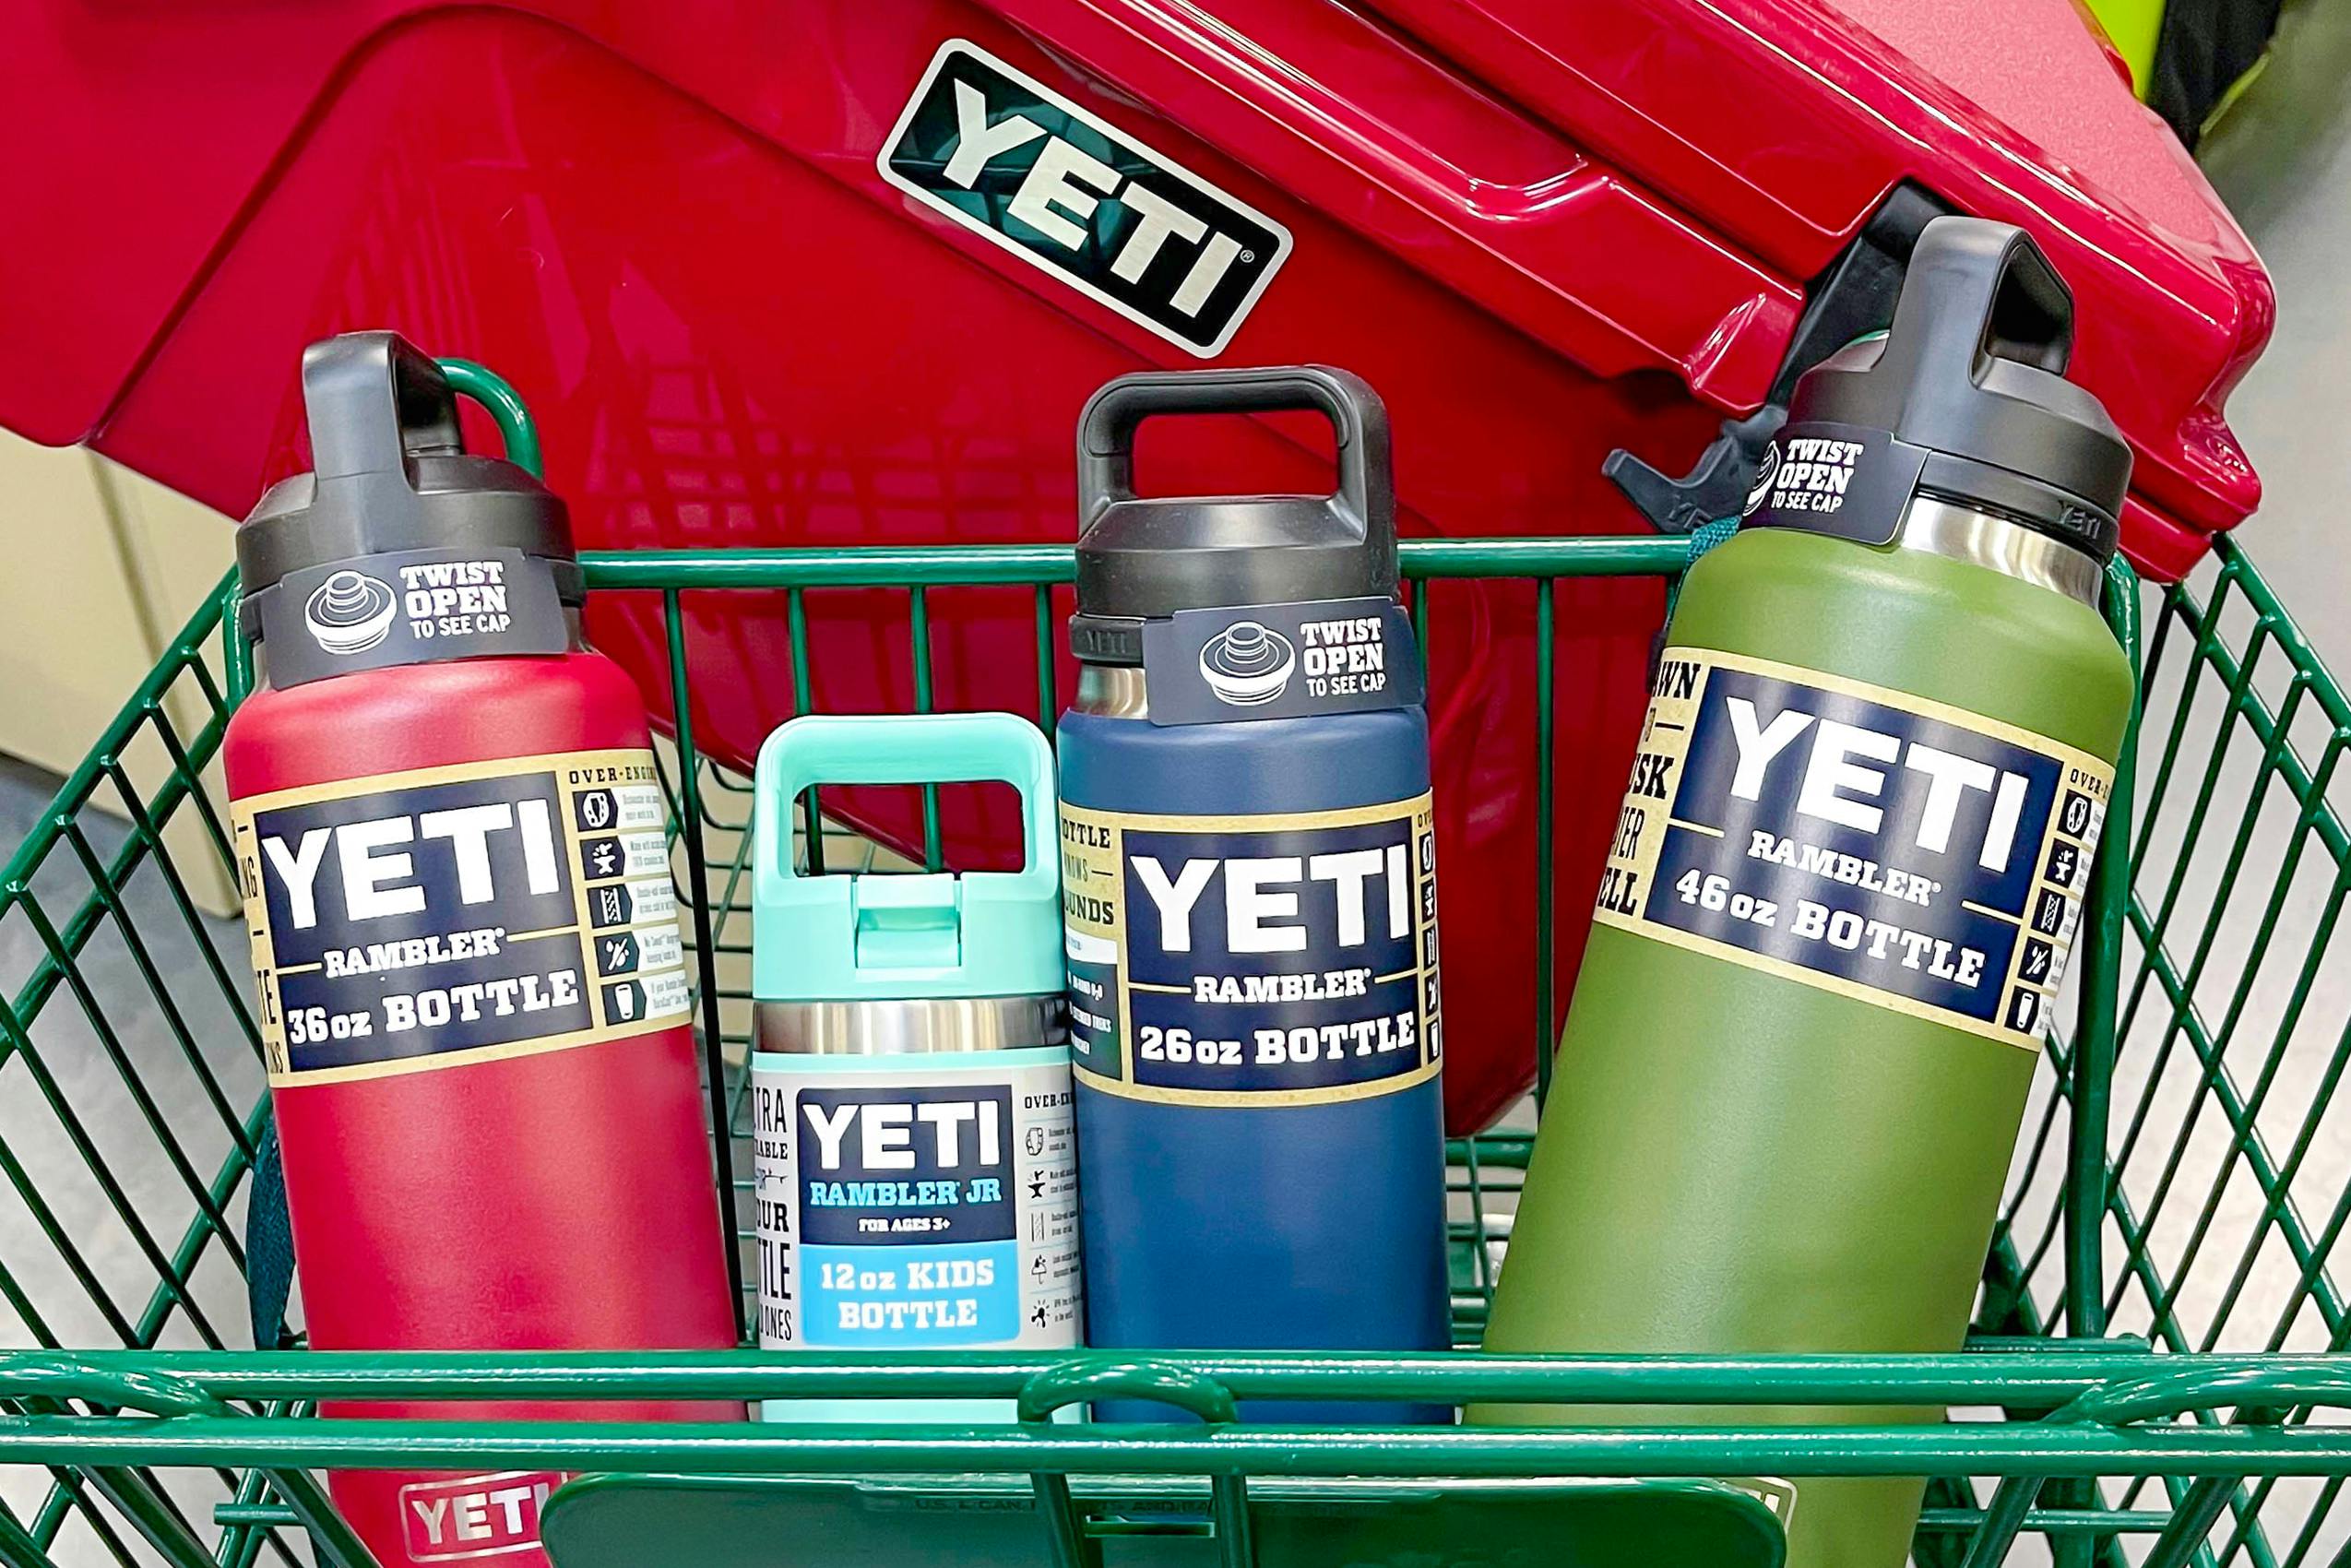 REI Has a Yeti Sale You Won't Want to Miss